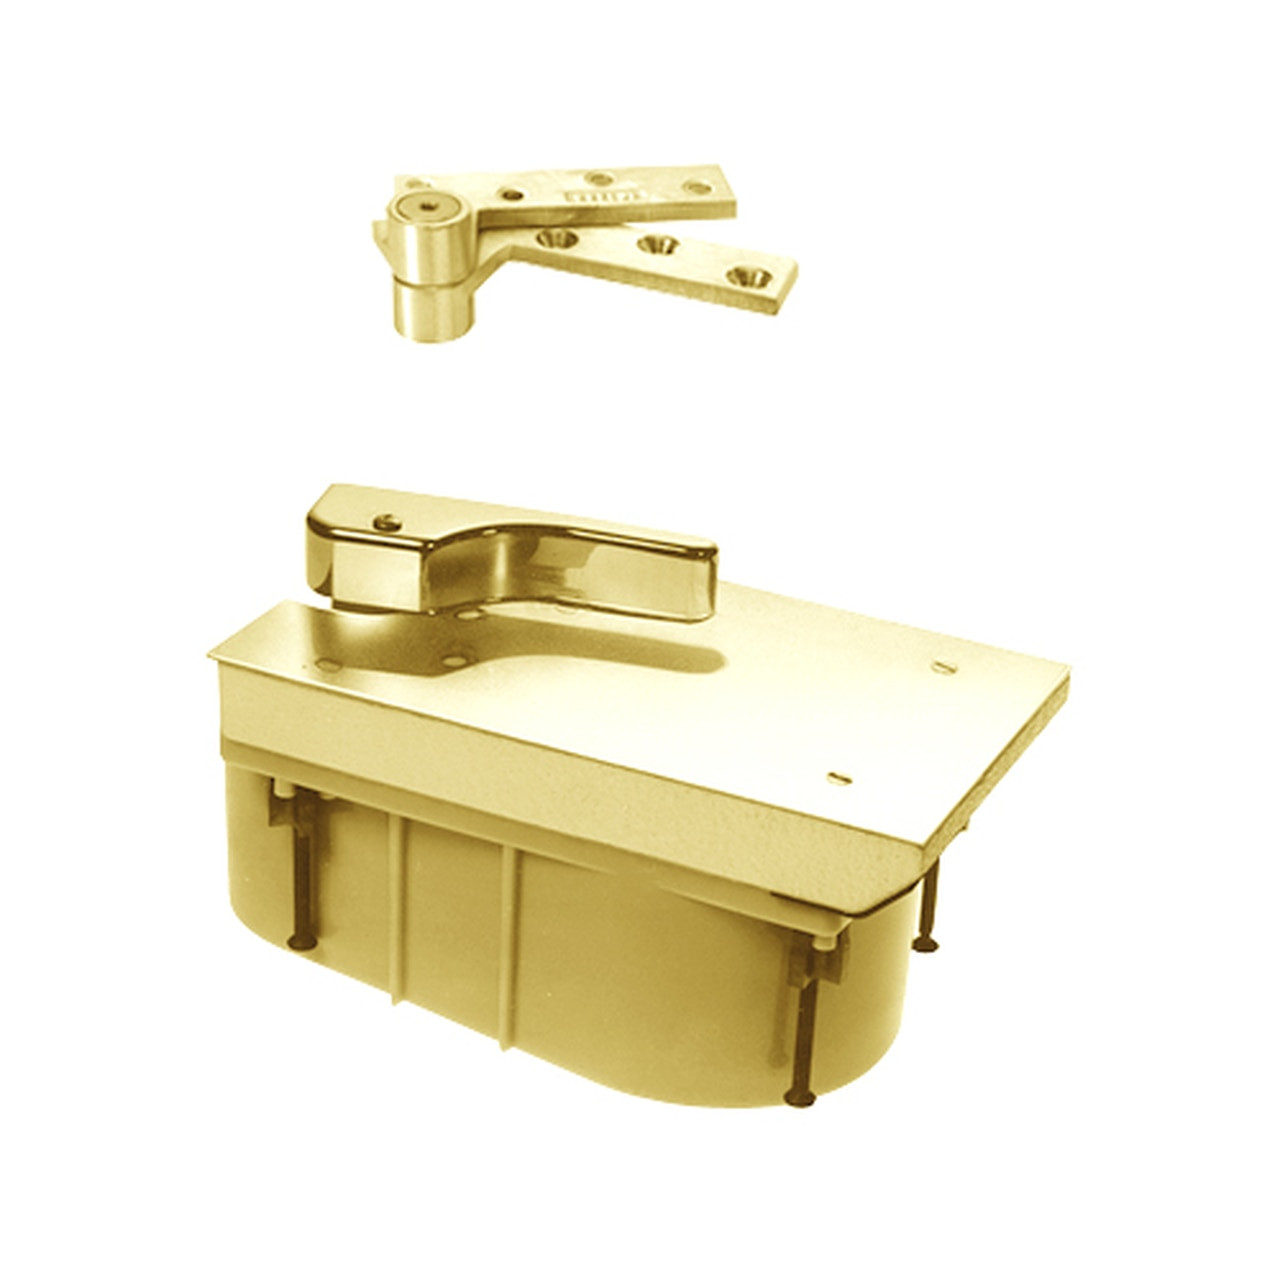 FQ27-90N-LCC-LH-605 Rixson 27 Series Heavy Duty Quick Install Offset Hung Floor Closer in Bright Brass Finish